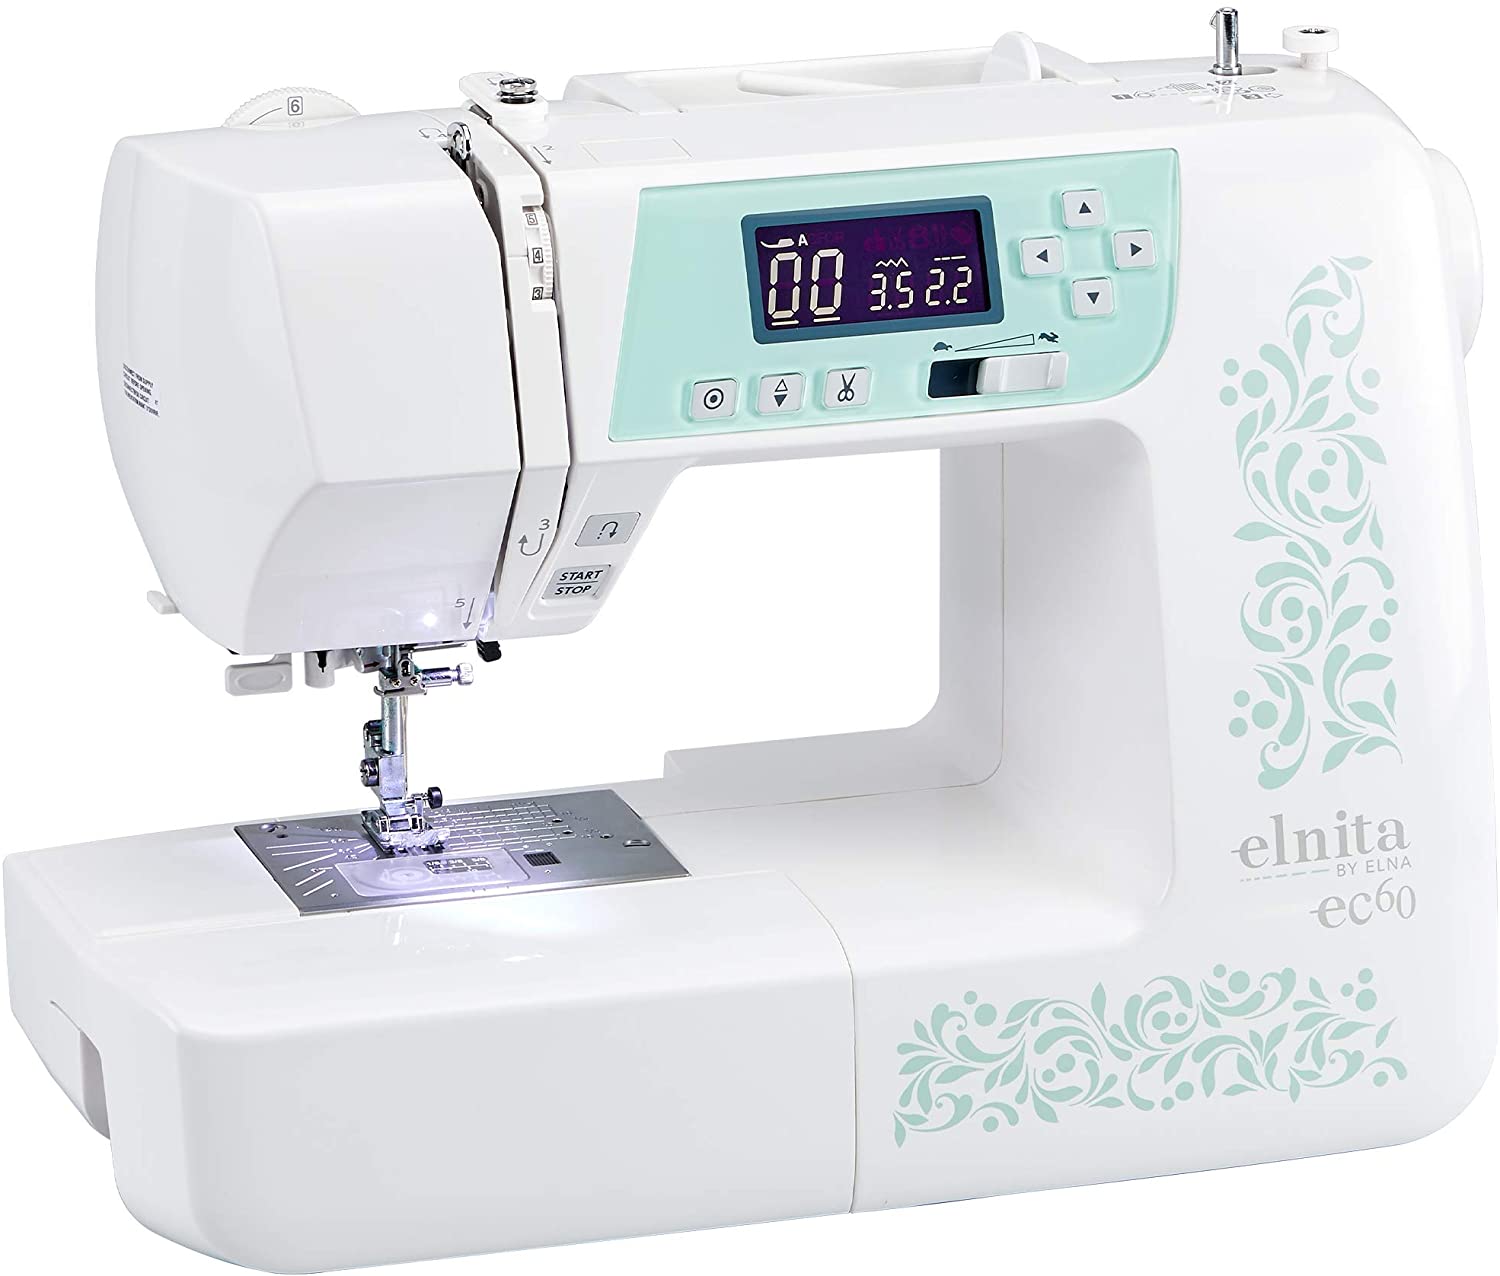 ELNA Sewing Machine - Sew Steady Ultimate Wish Table PACKAGE - Made in USA